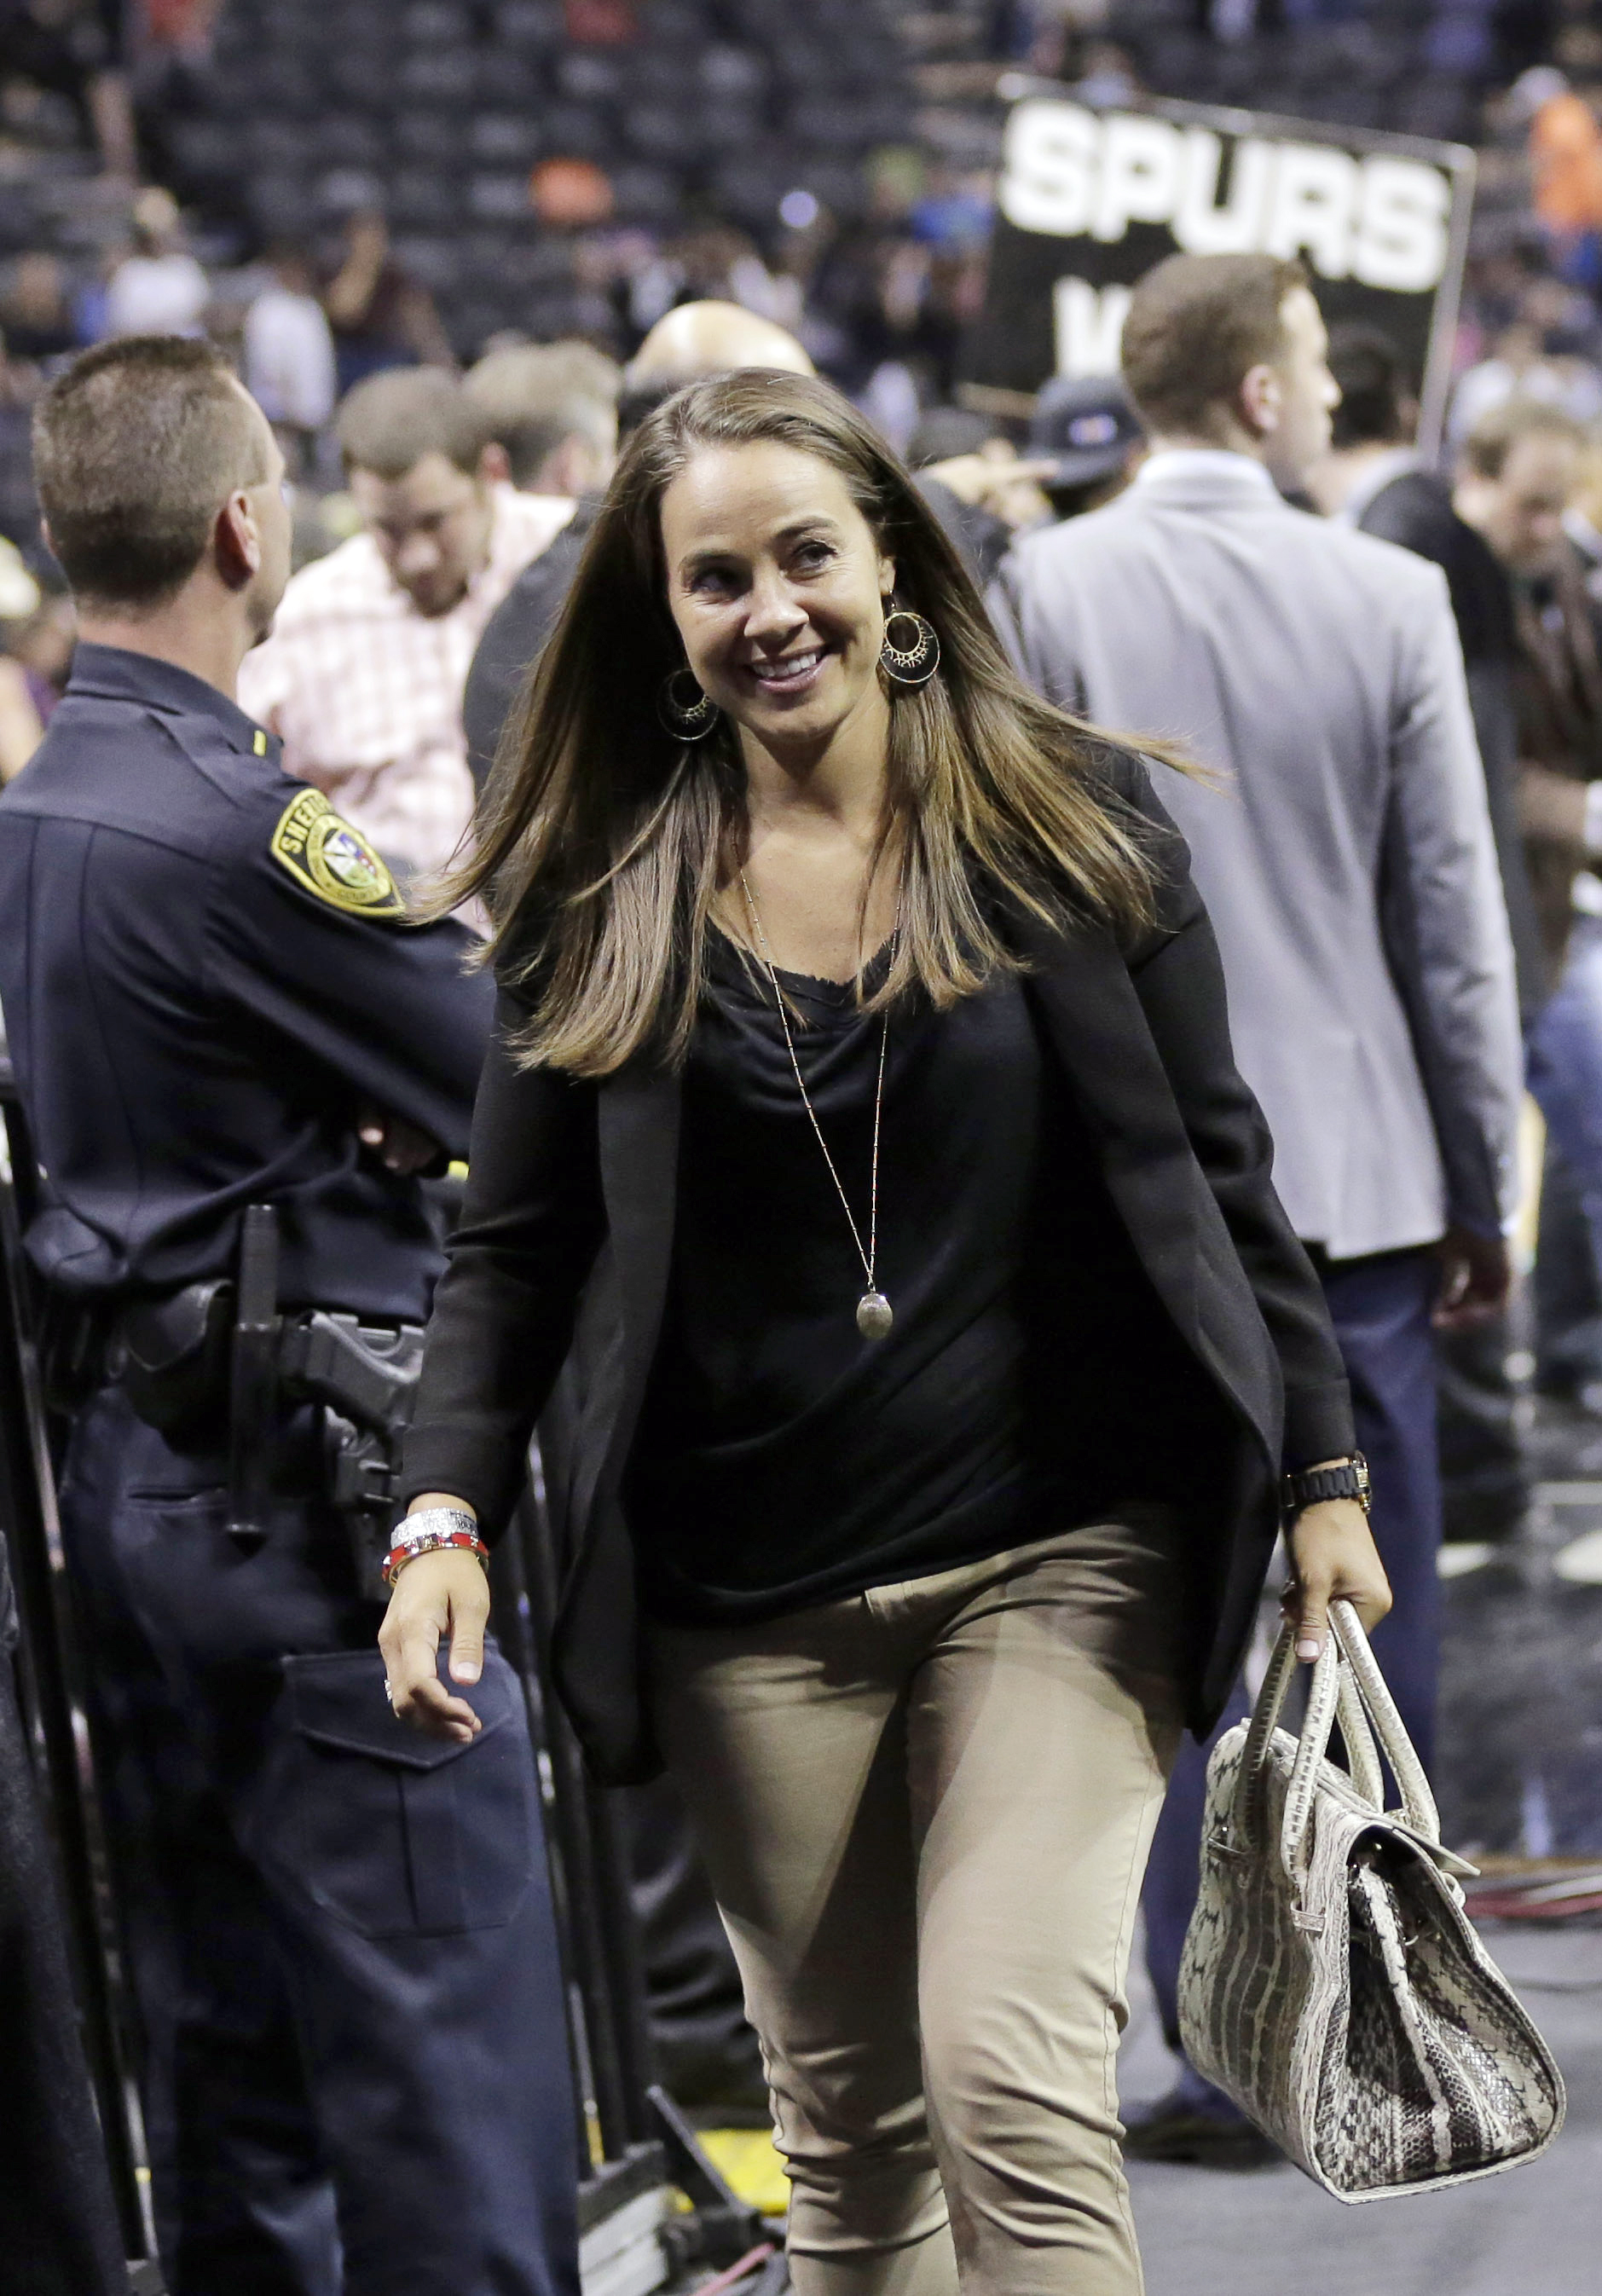 San Antonio Stars' Becky Hammon walks off the court following Game 5 of the opening-round NBA basketball playoff series between the San Antonio Spurs and the Dallas Mavericks in San Antonio on April 30, 2014